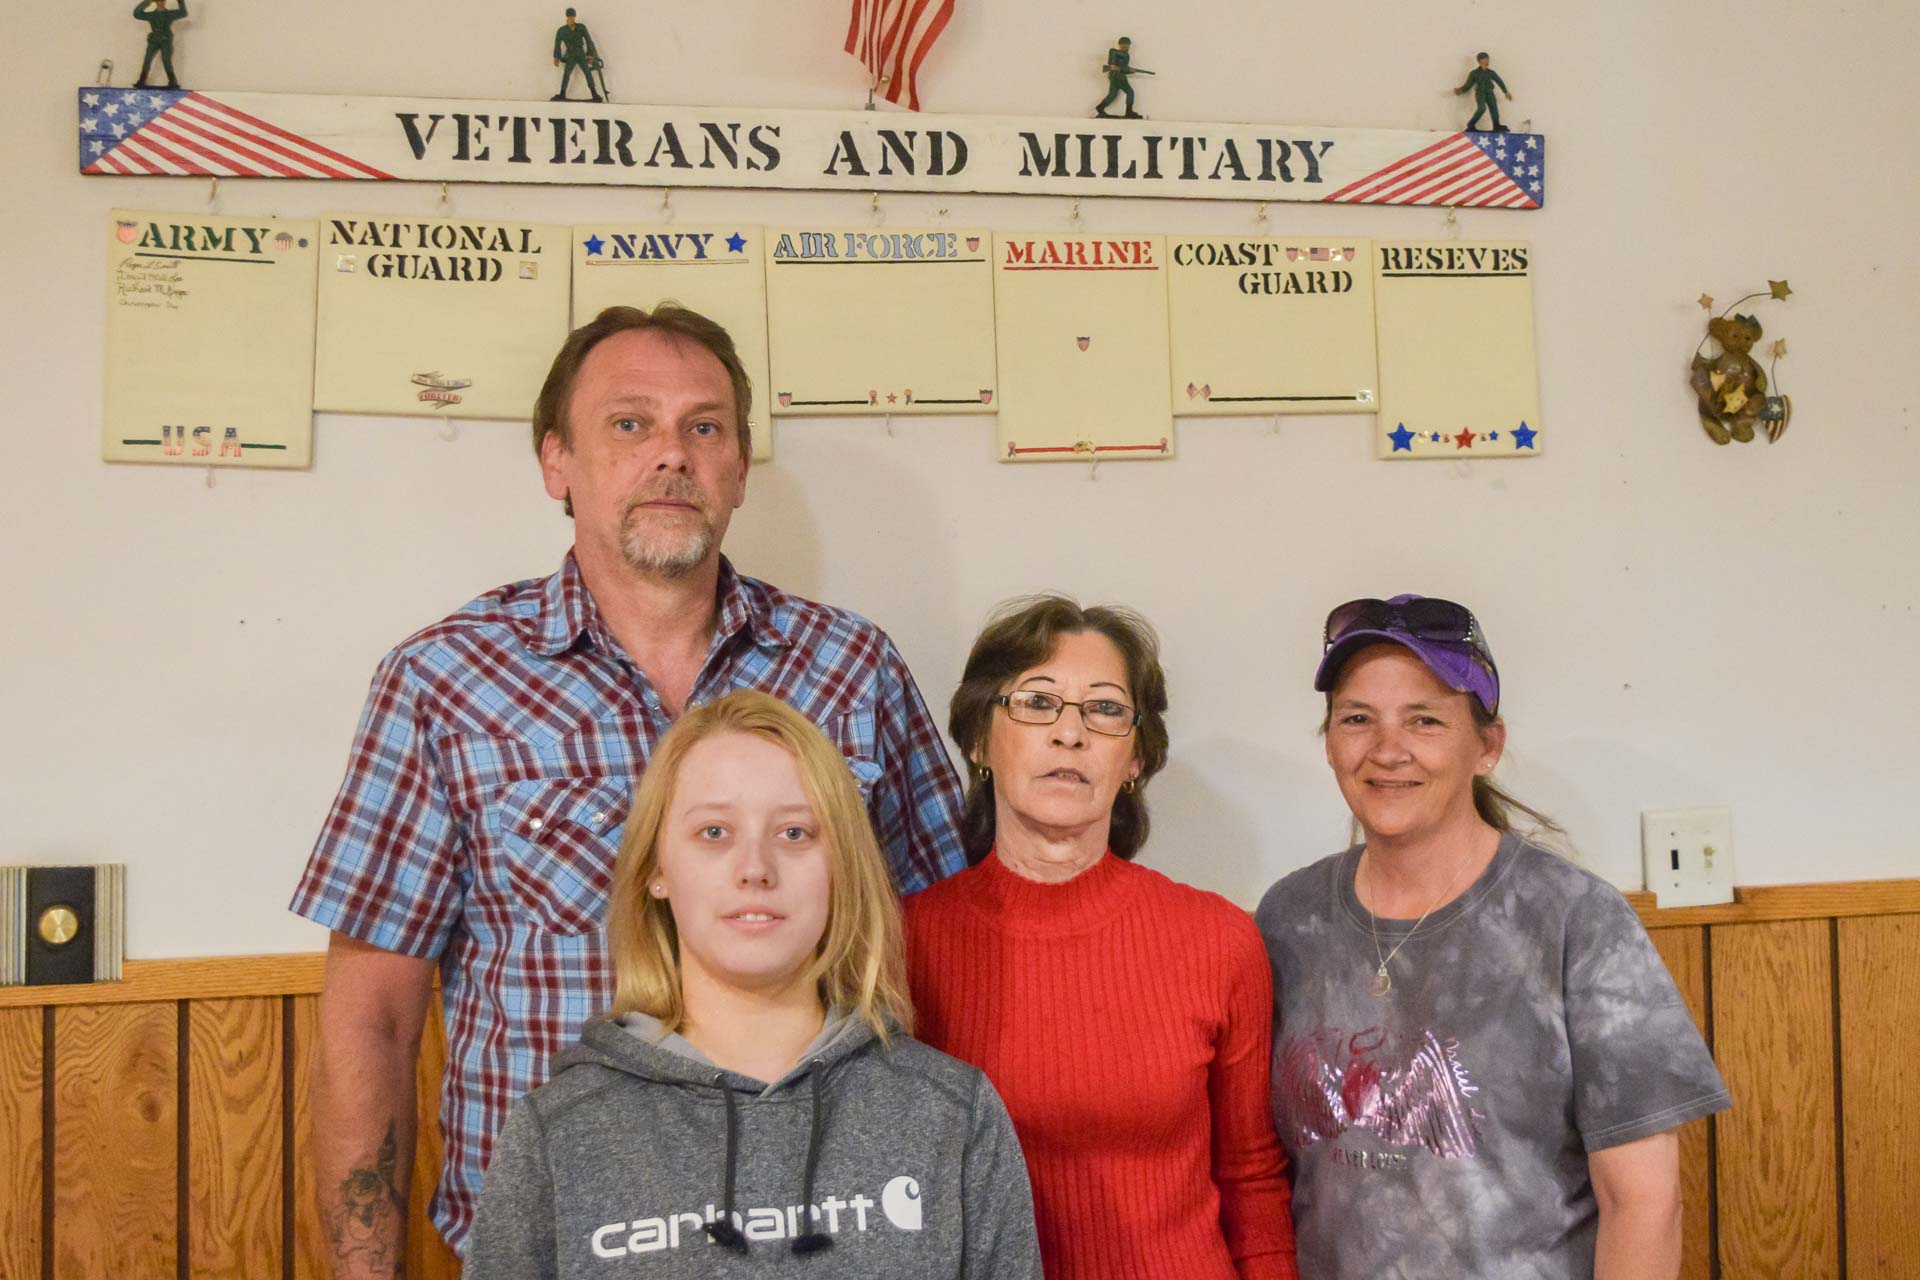 Linda’s Kitchen will open Saturday, July 4 at 8 a.m. in the Moose Lodge #598 building located at 25 North Kanawha St. in Buckhannon. Pictured are Pete Carpenter, Moose Administrator; Tressa Watson, employee; Linda Lee, cook; and Carlye Day, waitress.